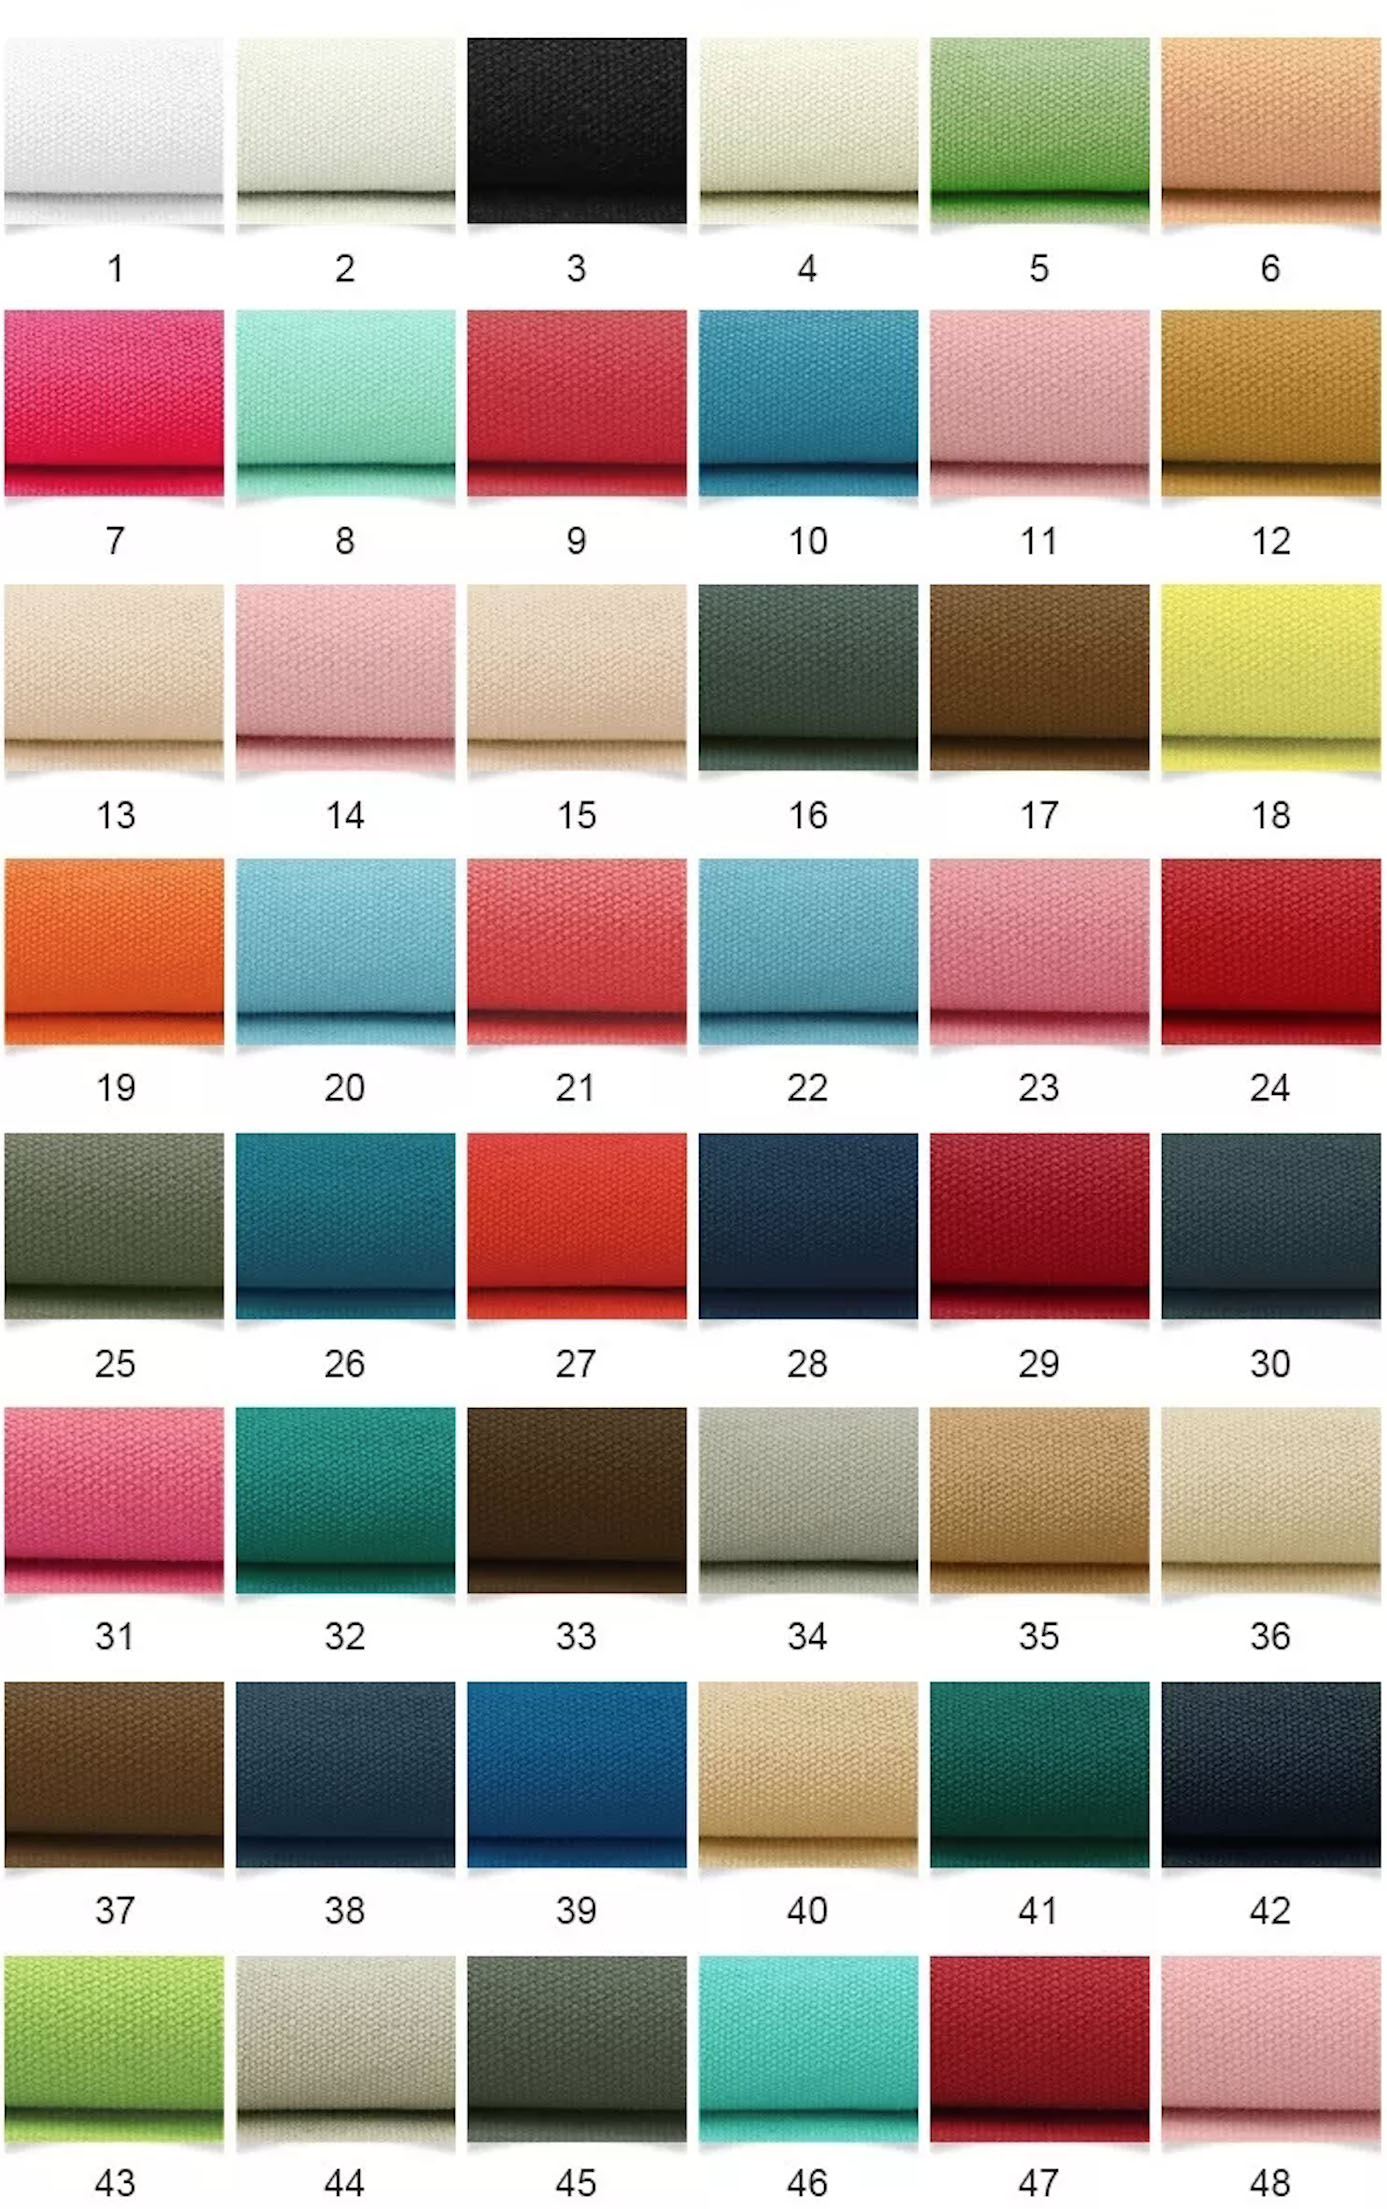 View available cotton colors from our chart